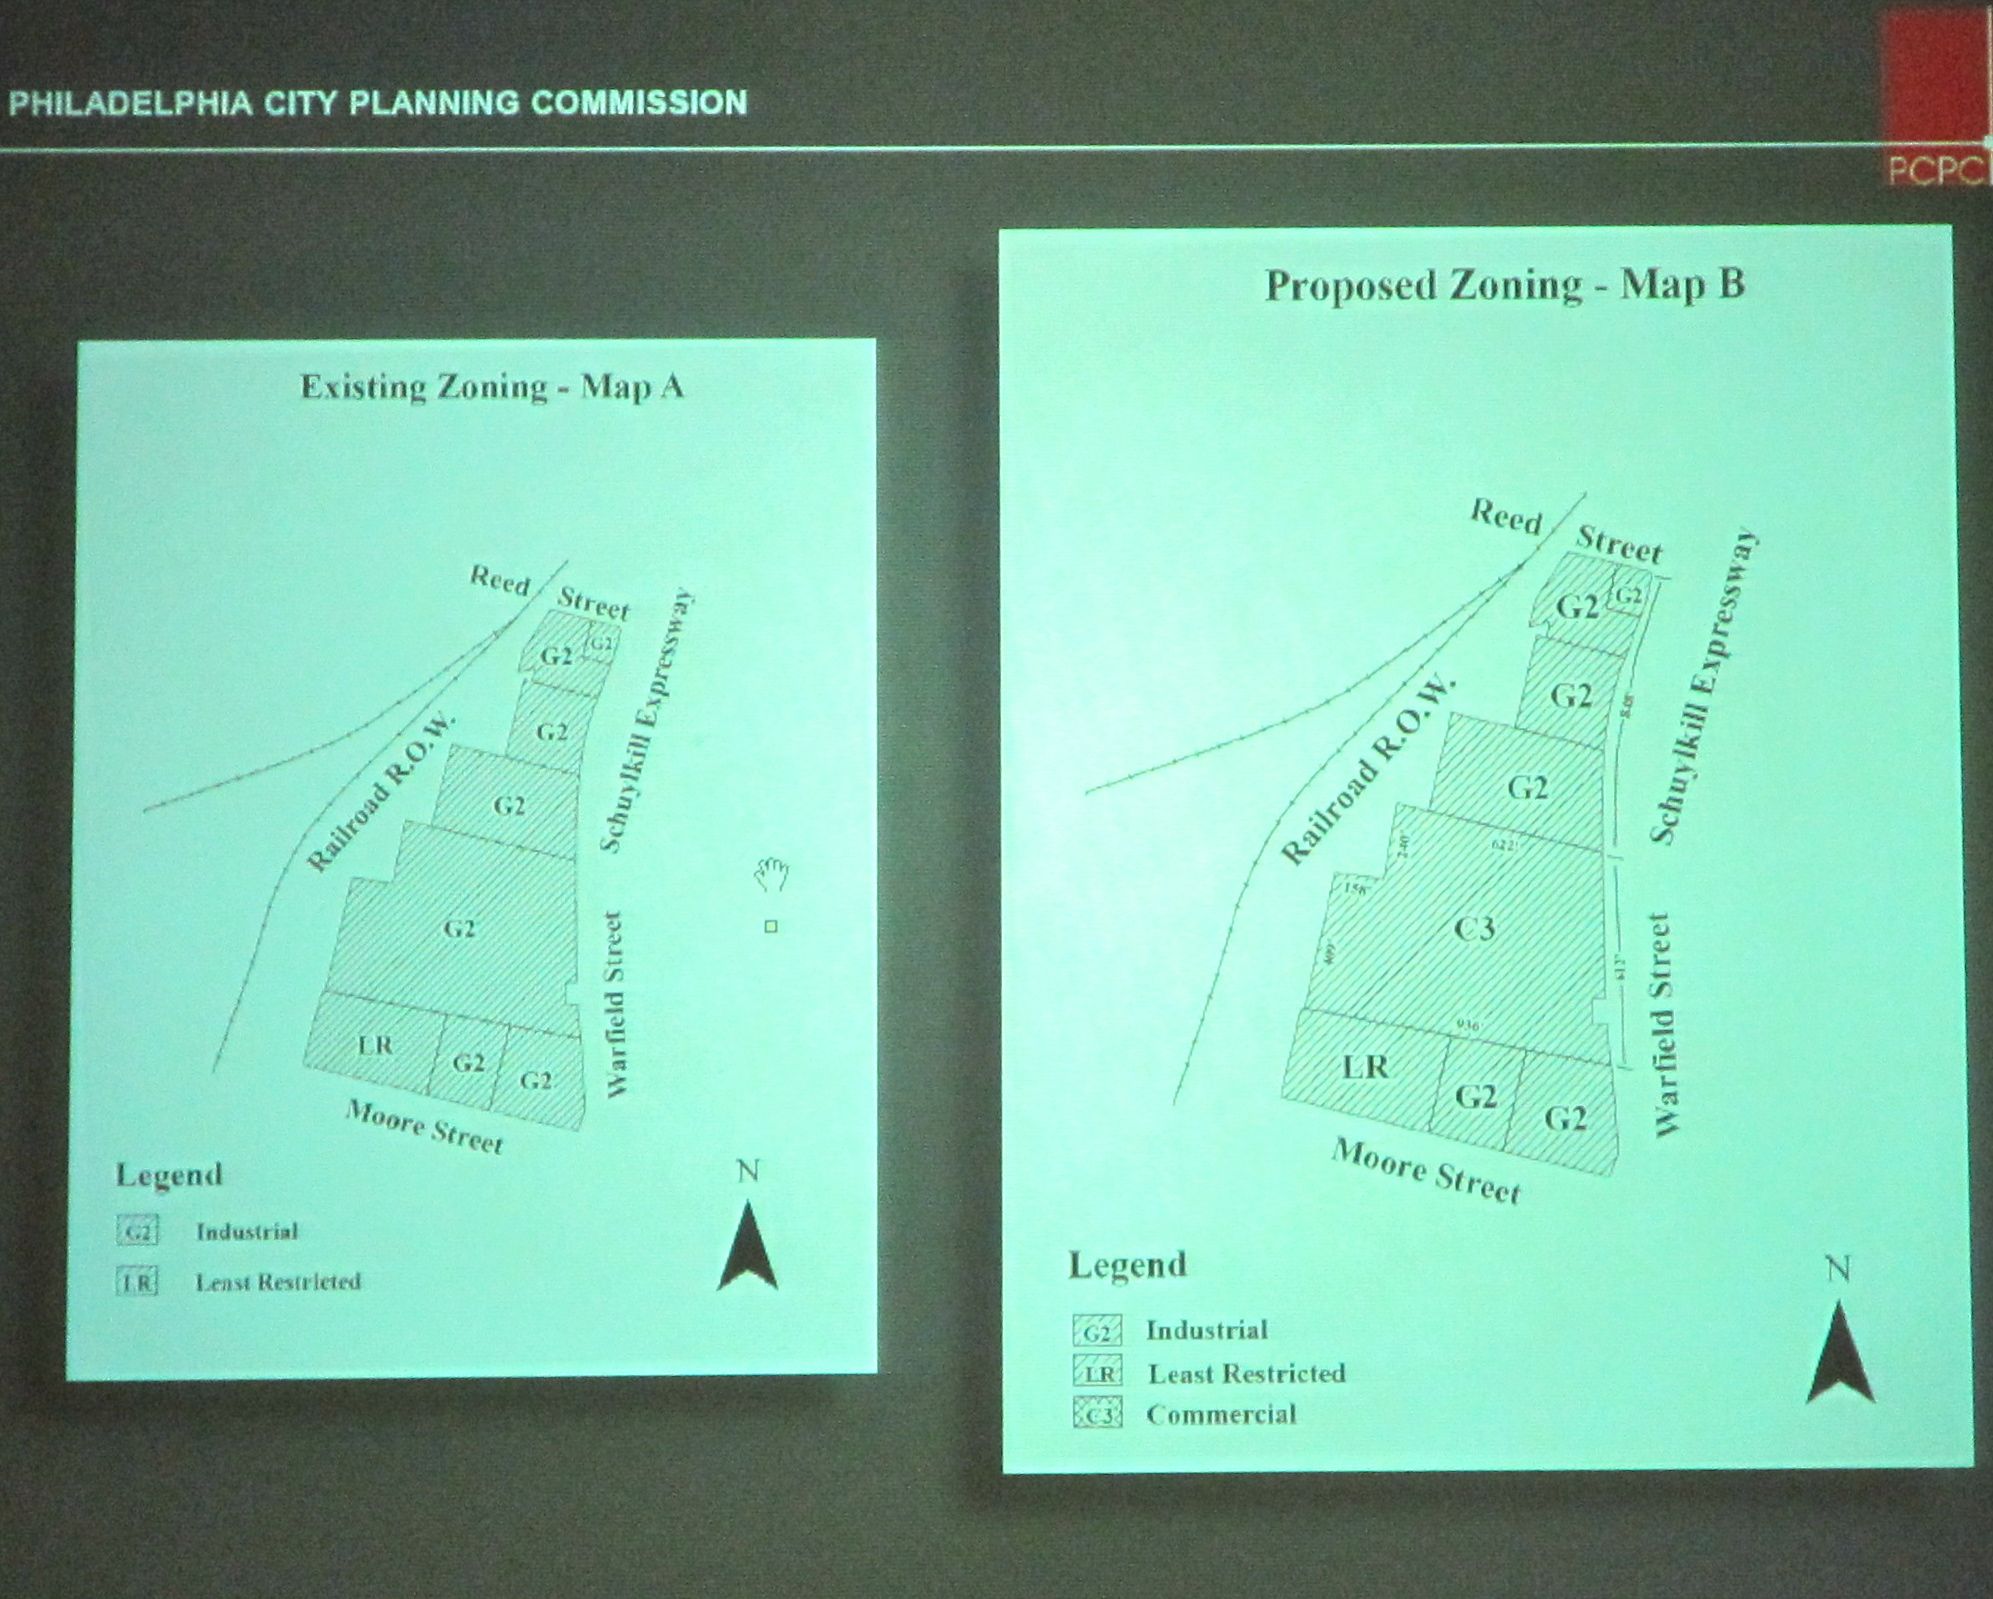 PCPC: A day of comp plans, urban growth and zoning denials